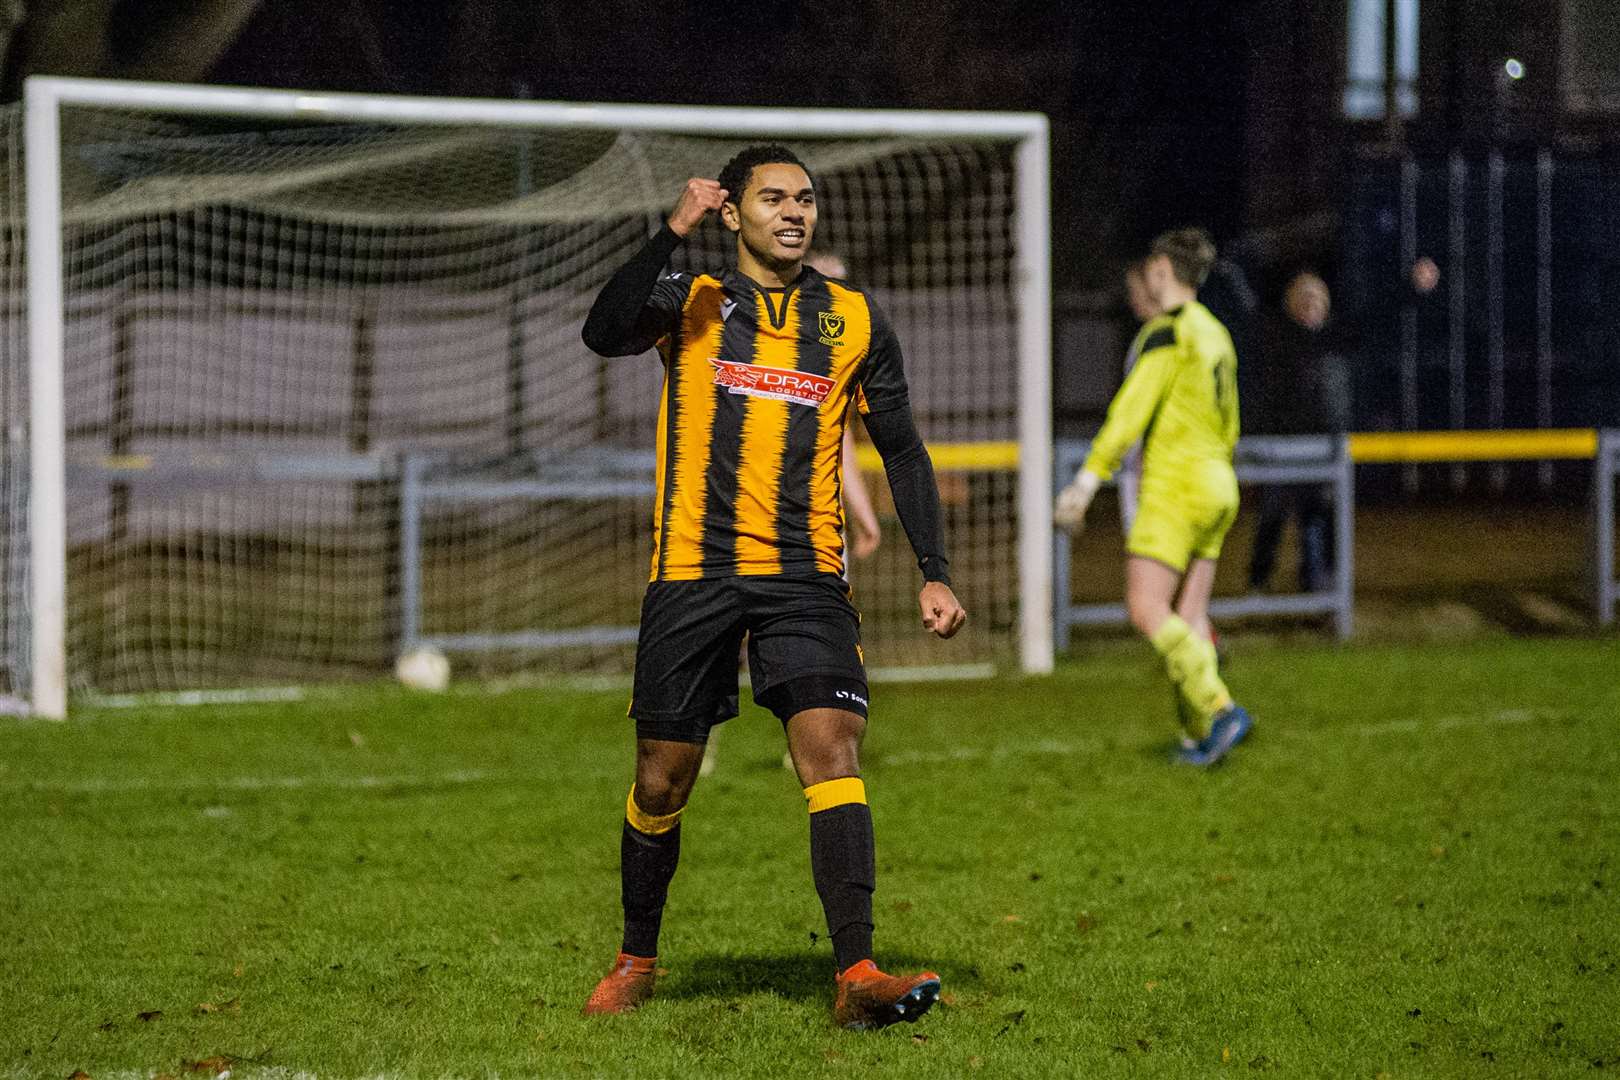 Huntly forward Robbie Foster celebrating a goal for Huntly. Picture: Daniel Forsyth